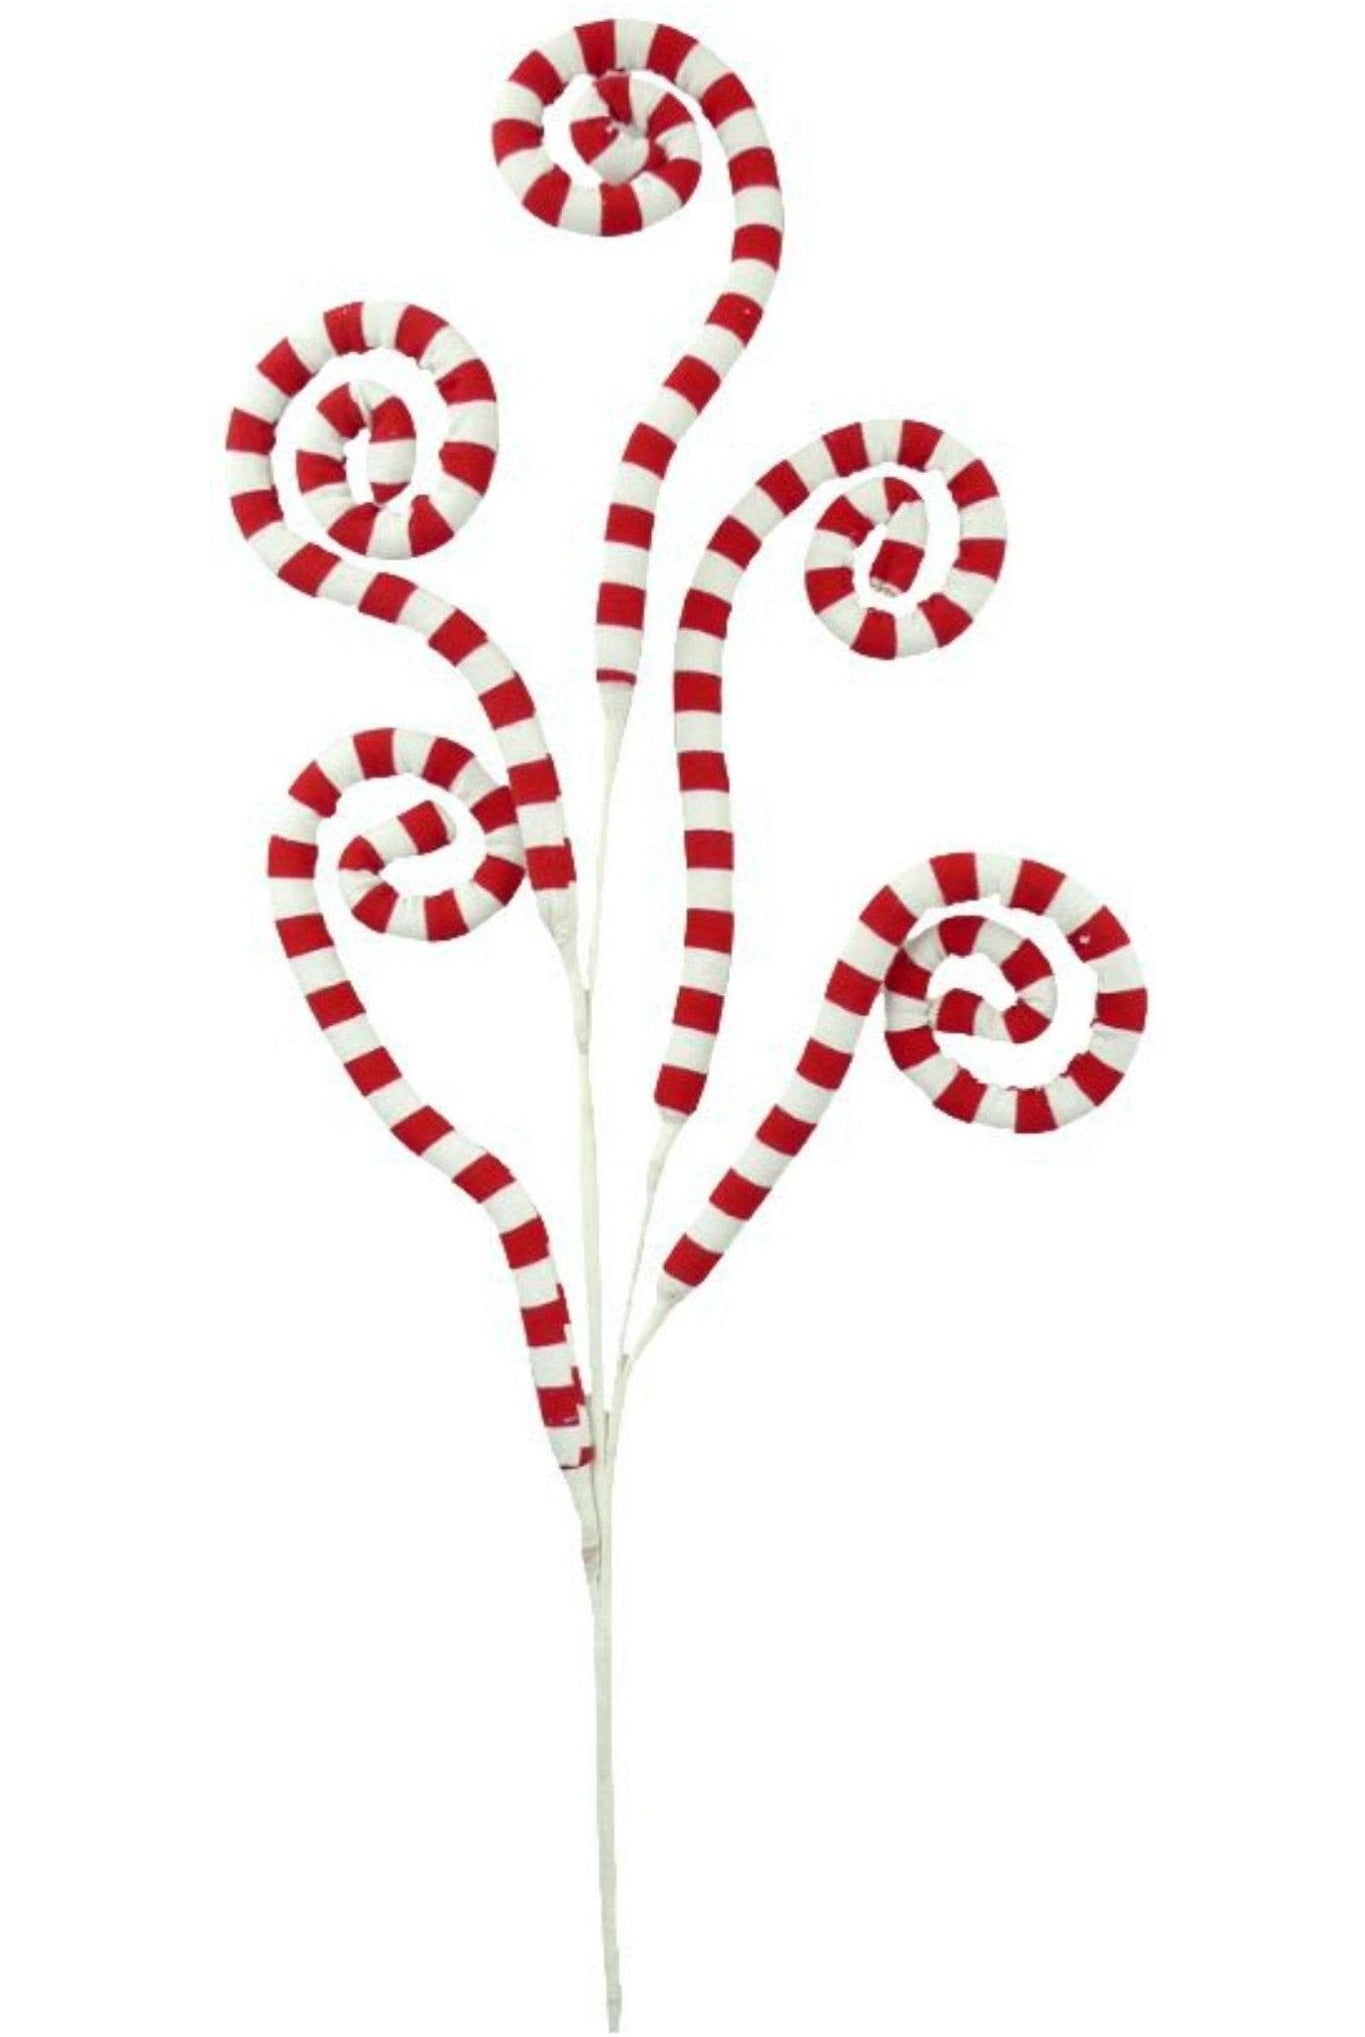 Shop For 30" Peppermint Fabric Spiral Spray: Red & White 84732RDWT